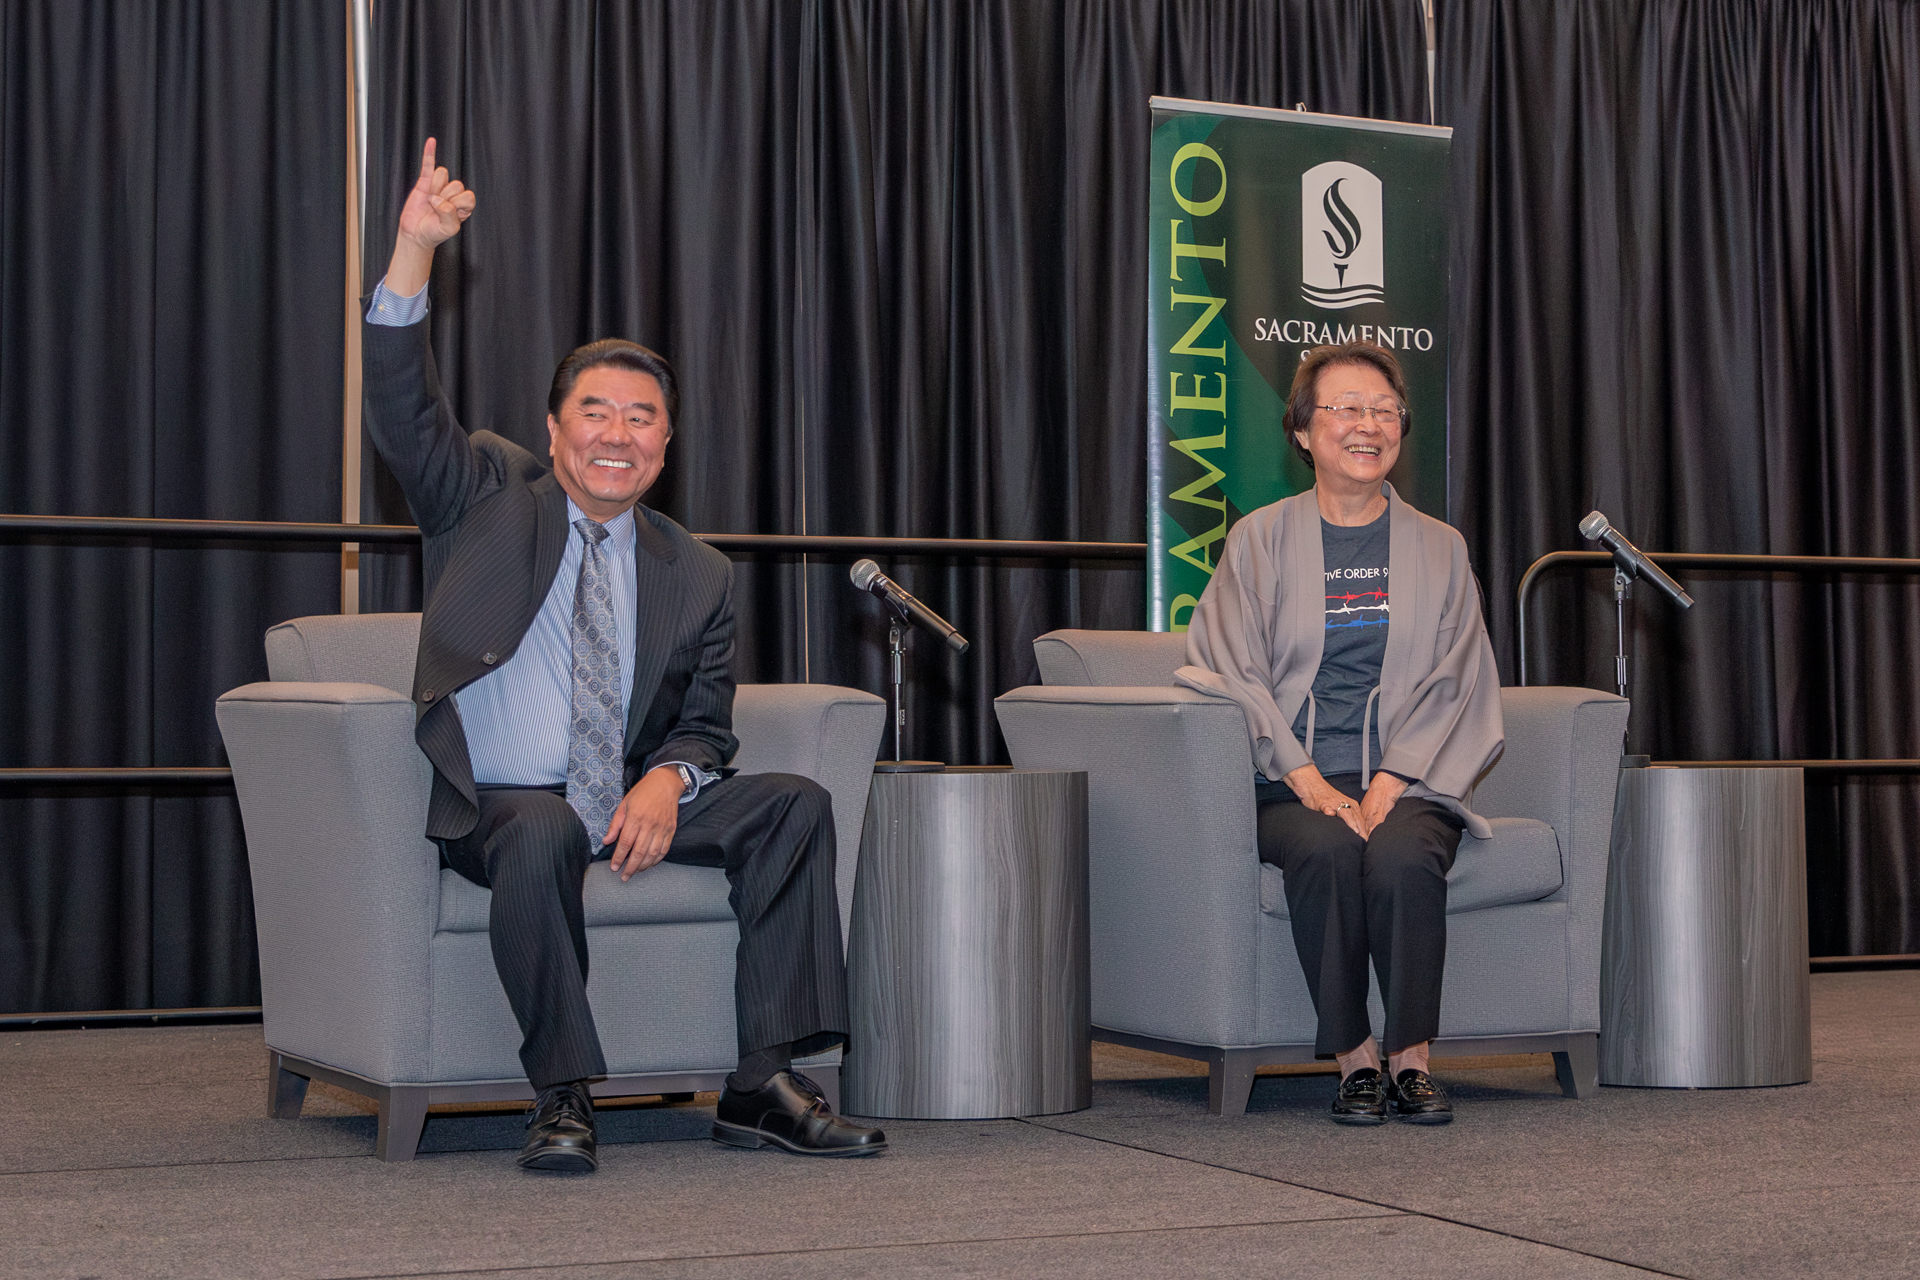 Two speakers pose on stage, one saluting Stingers Up, at a recent One Book Program event.